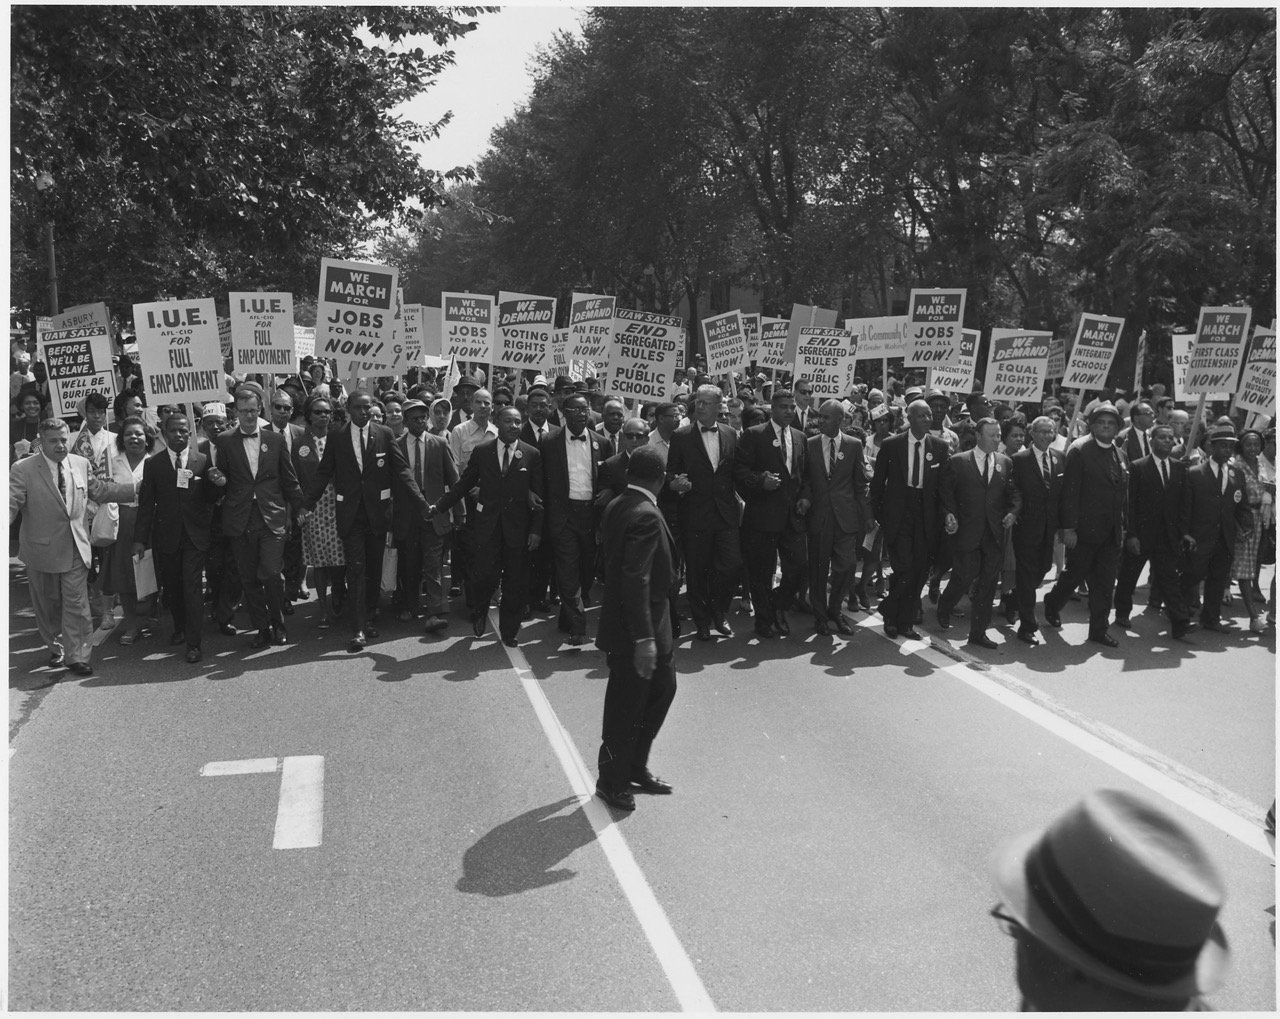  Civil Rights March on Washington, D.C.&nbsp; August 28, 1963. Credit: unknown 